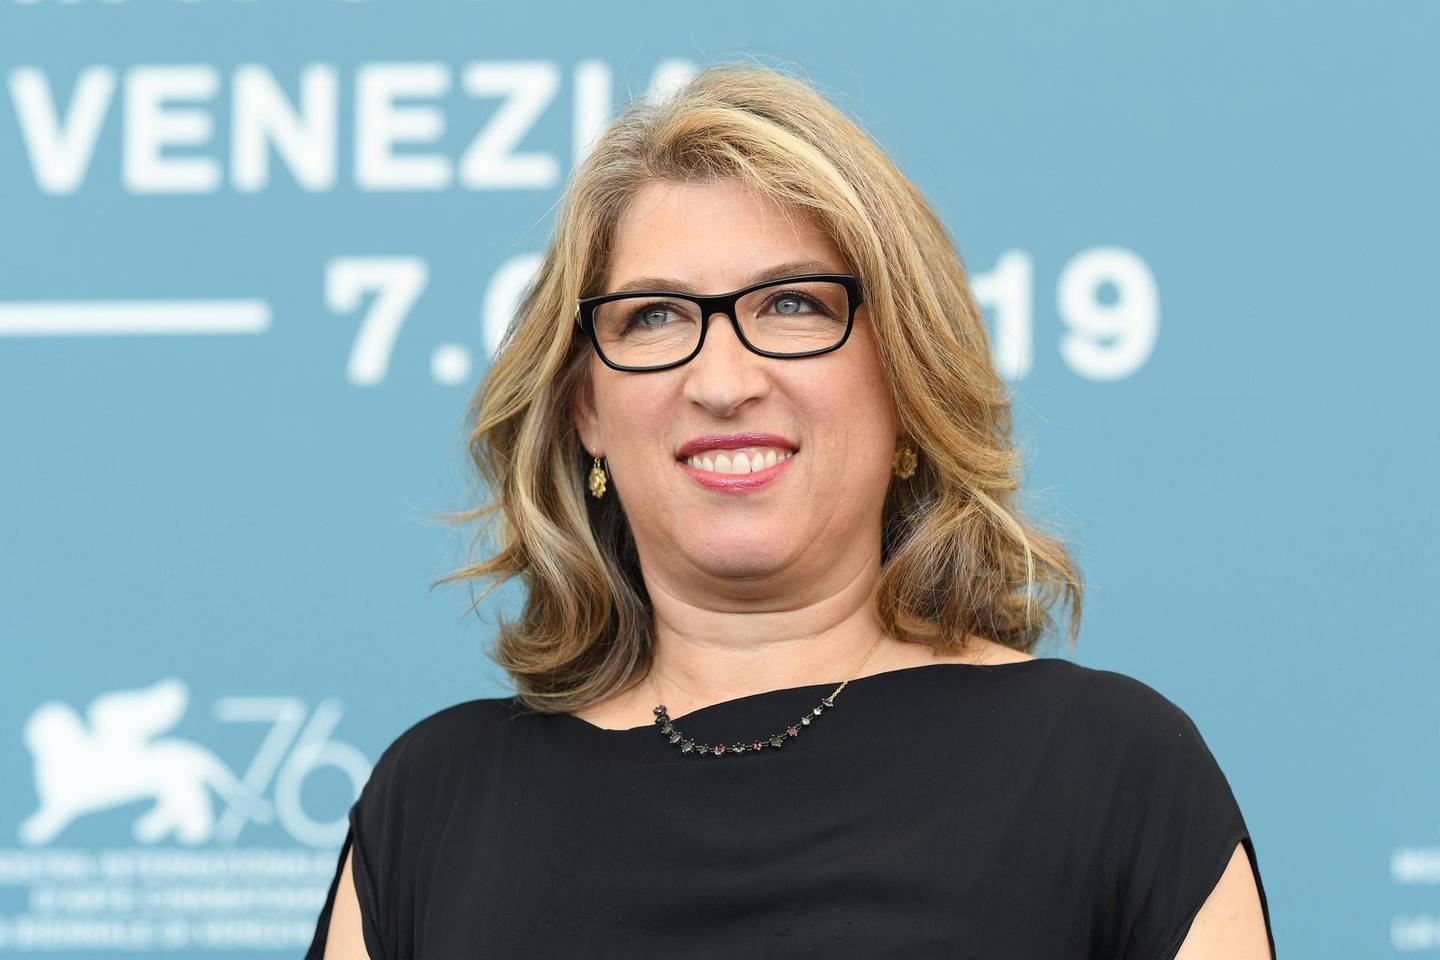 VENICE, ITALY - AUGUST 30:  Director Lauren Greenfield attends "The Kingmaker" photocall during the 76th Venice Film Festival at Sala Grande on August 30, 2019 in Venice, Italy. (Photo by Pascal Le Segretain/Getty Images)